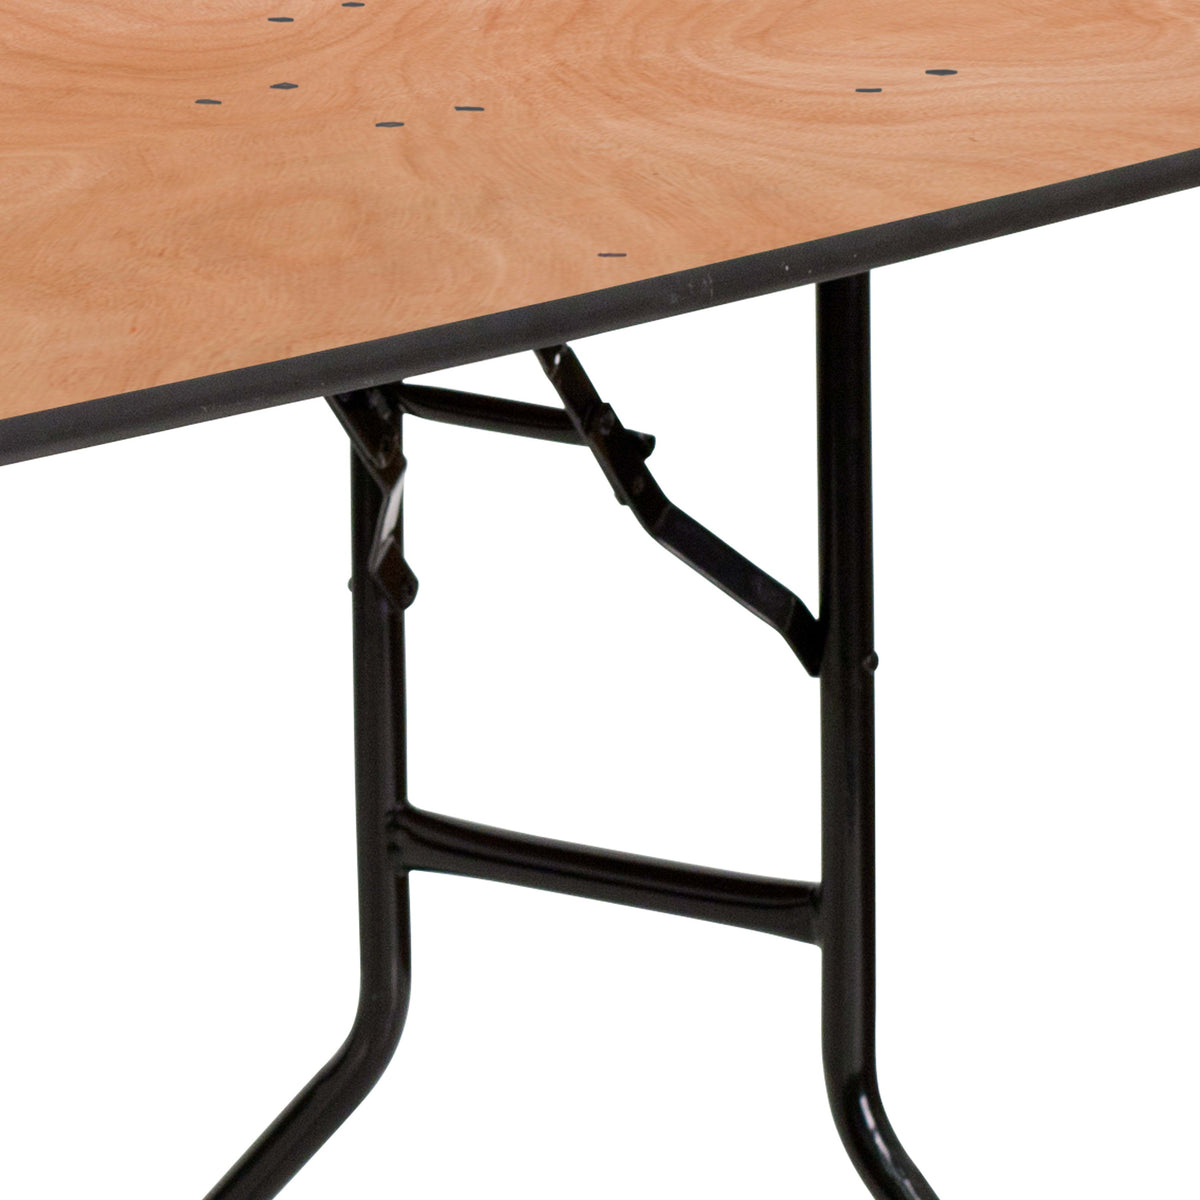 5-Foot Half-Round Wood Folding Banquet Table - Event & Catering Table